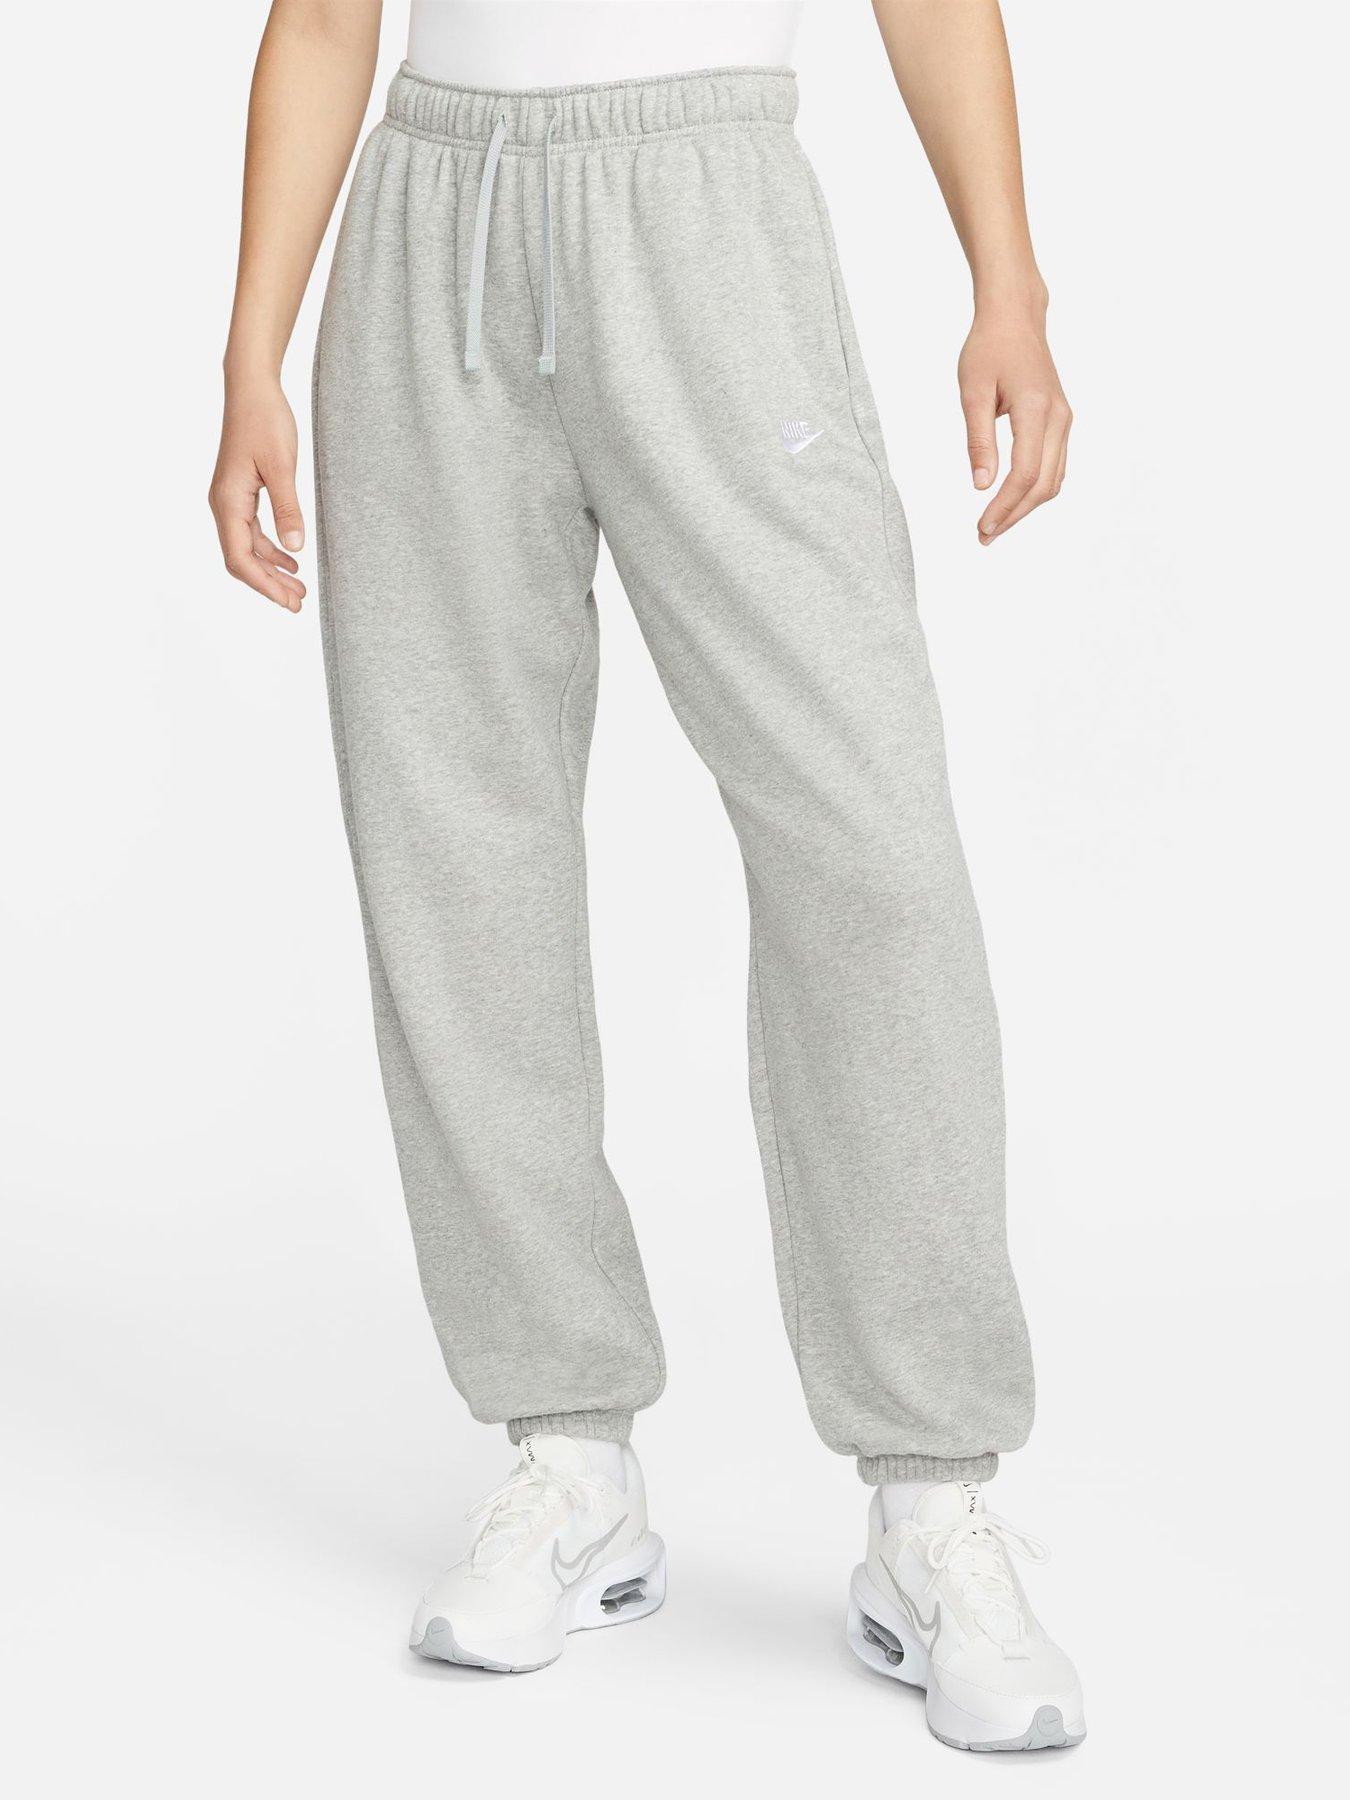 discount 67% WOMEN FASHION Trousers Tracksuit and joggers Shorts Gray S Oysho tracksuit and joggers 